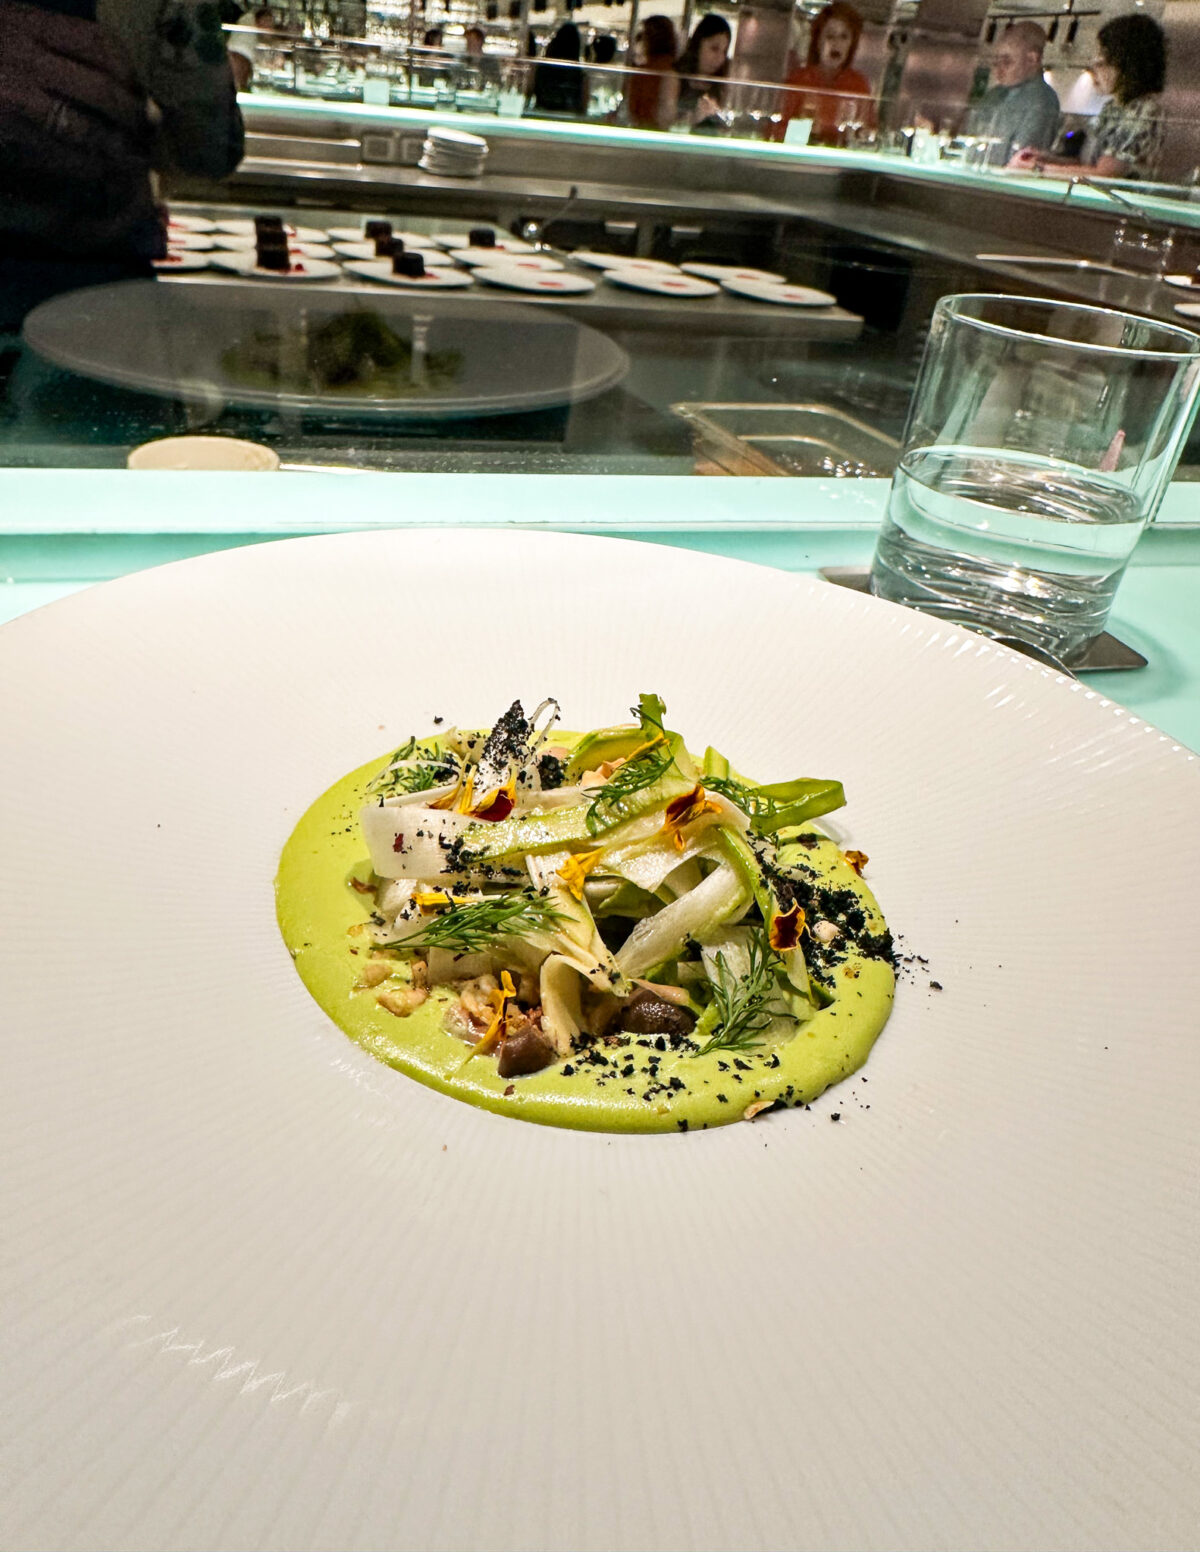 A gourmet asparagus panna cotta dish from The Test Kitchen on Virgin Voyages, artfully plated with delicate garnishes.